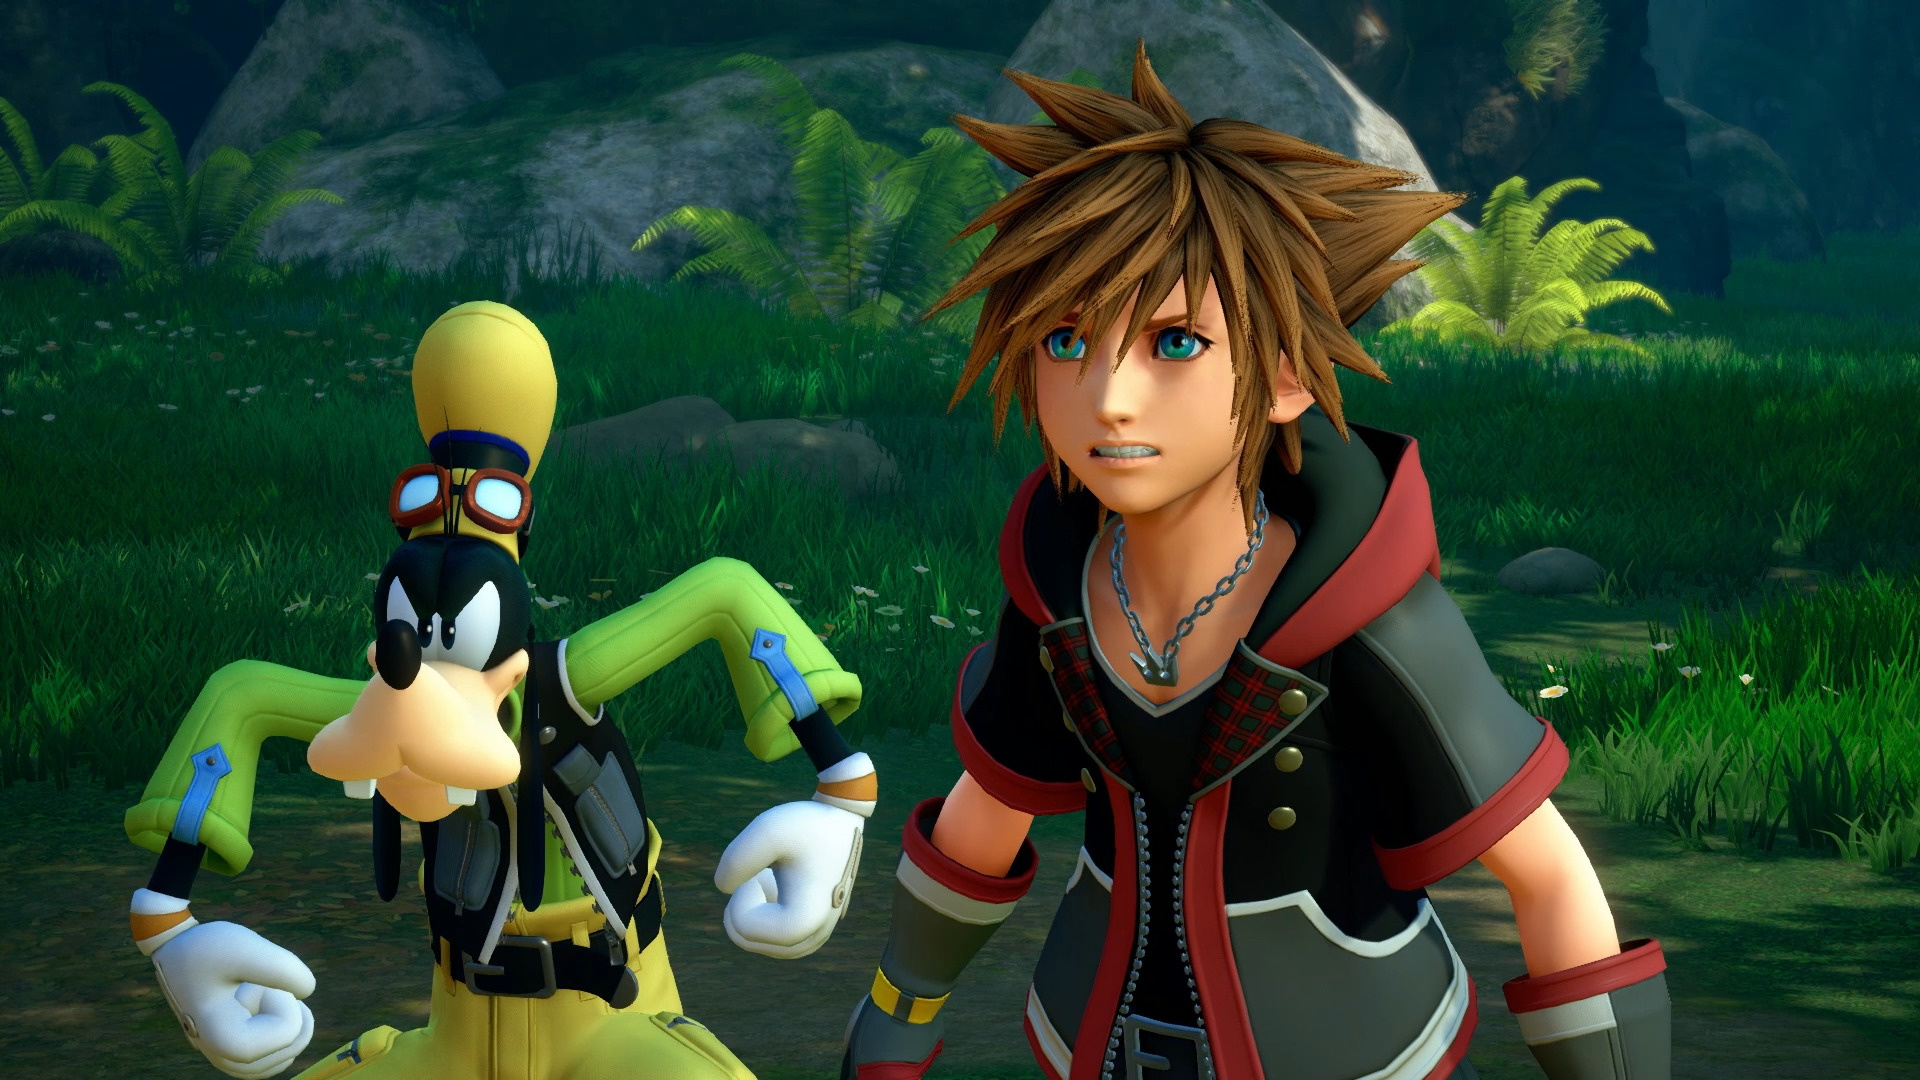 Limited Edition Kingdom Hearts 3 PS4 Pro Gets Release Date